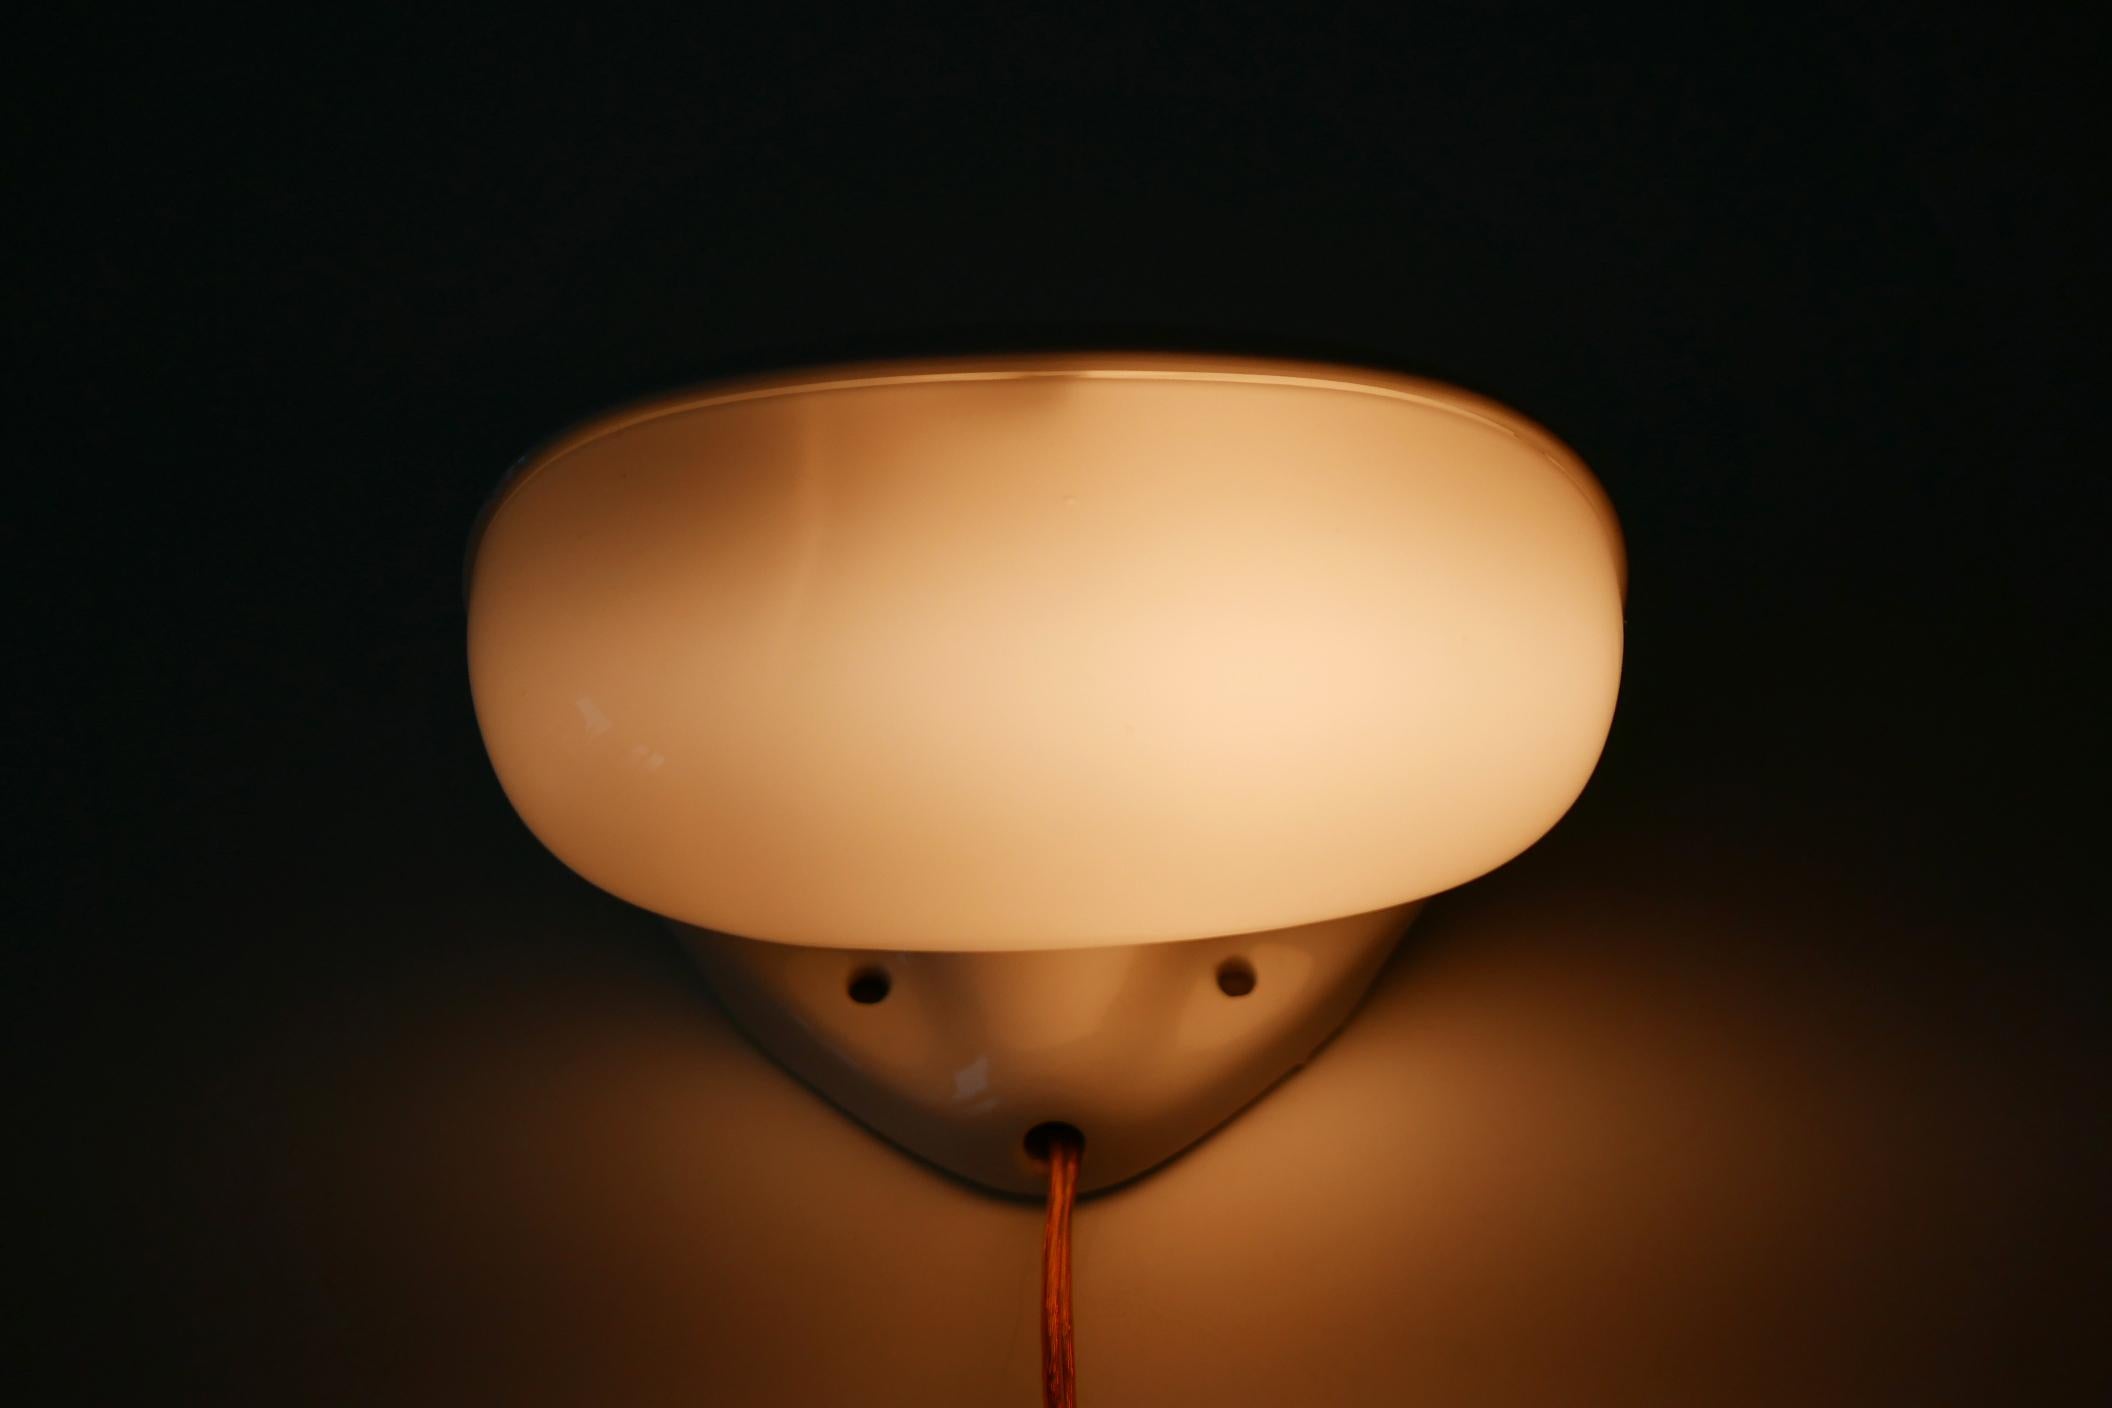 Elegant Mid-Century Modern mirror lamp or sconce. Modell number 348. Designed in 1956 by the famous German designer Wilhelm Wagenfeld. Manufactured by Lindner GmbH in 1950s-1960s, Germany.

Executed in glazed white ceramic and opaline glass, it